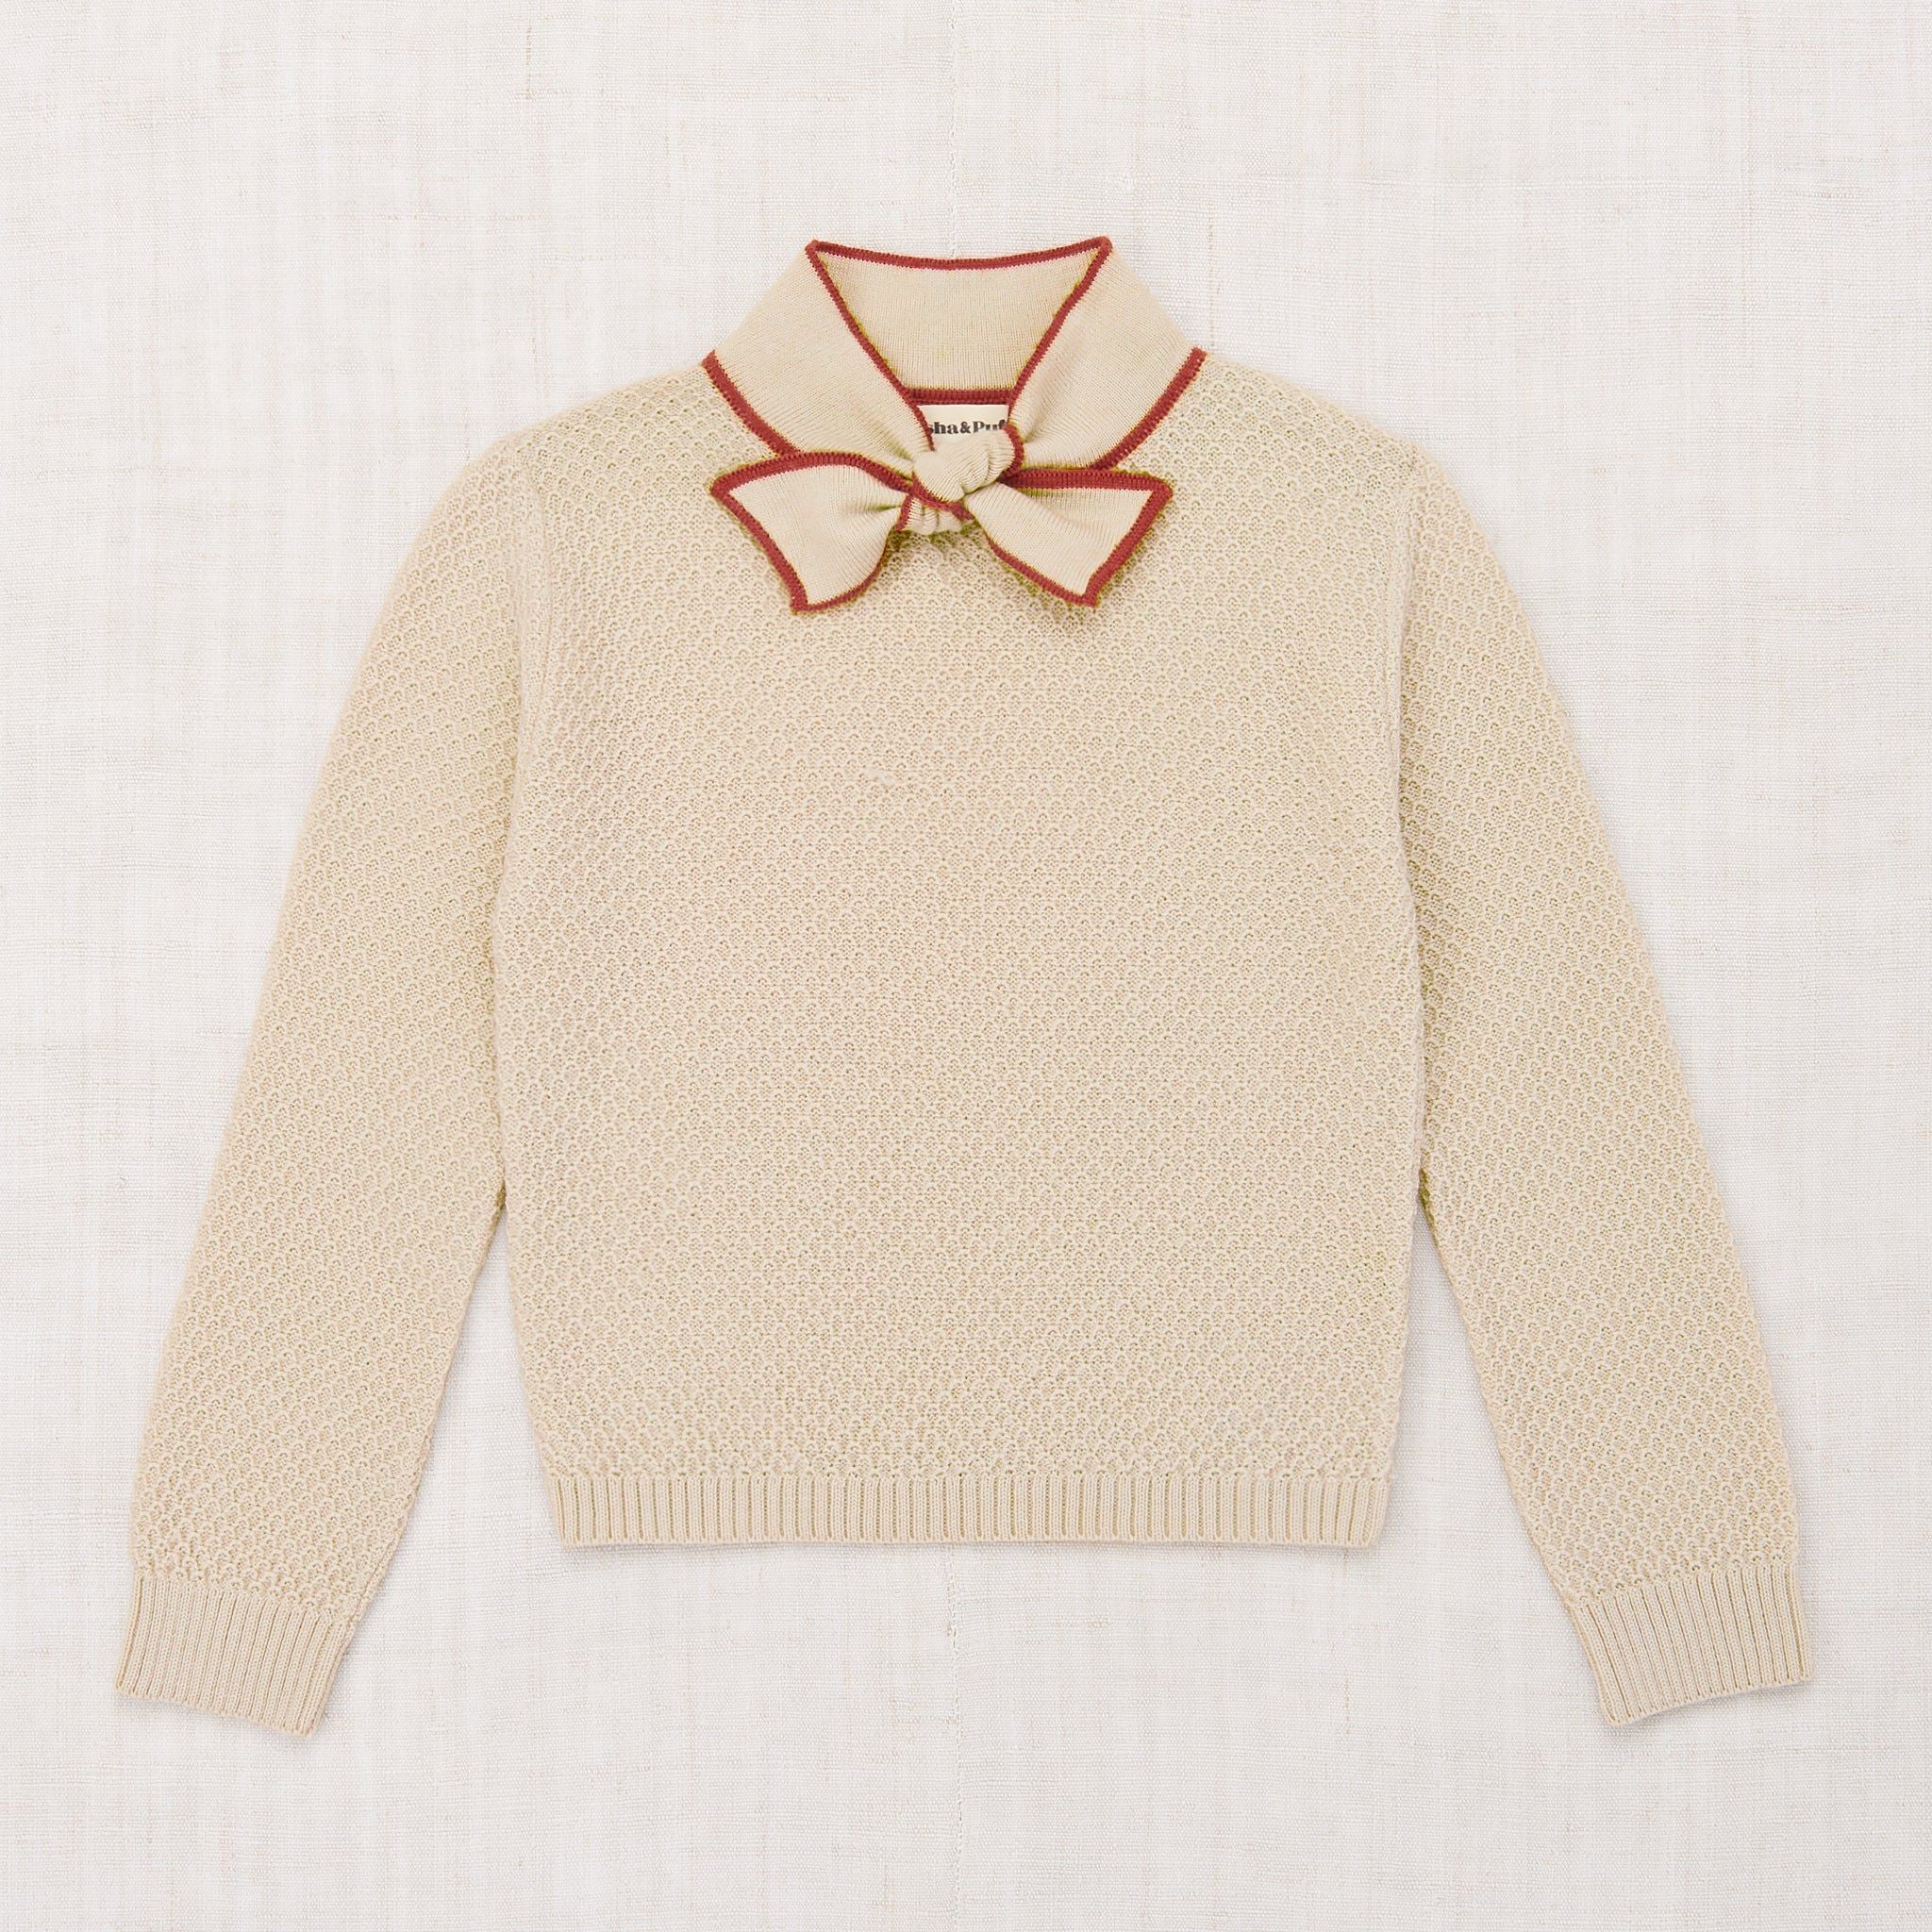 Misha and Puff, Bow Scout Sweater in Alabaster – CouCou